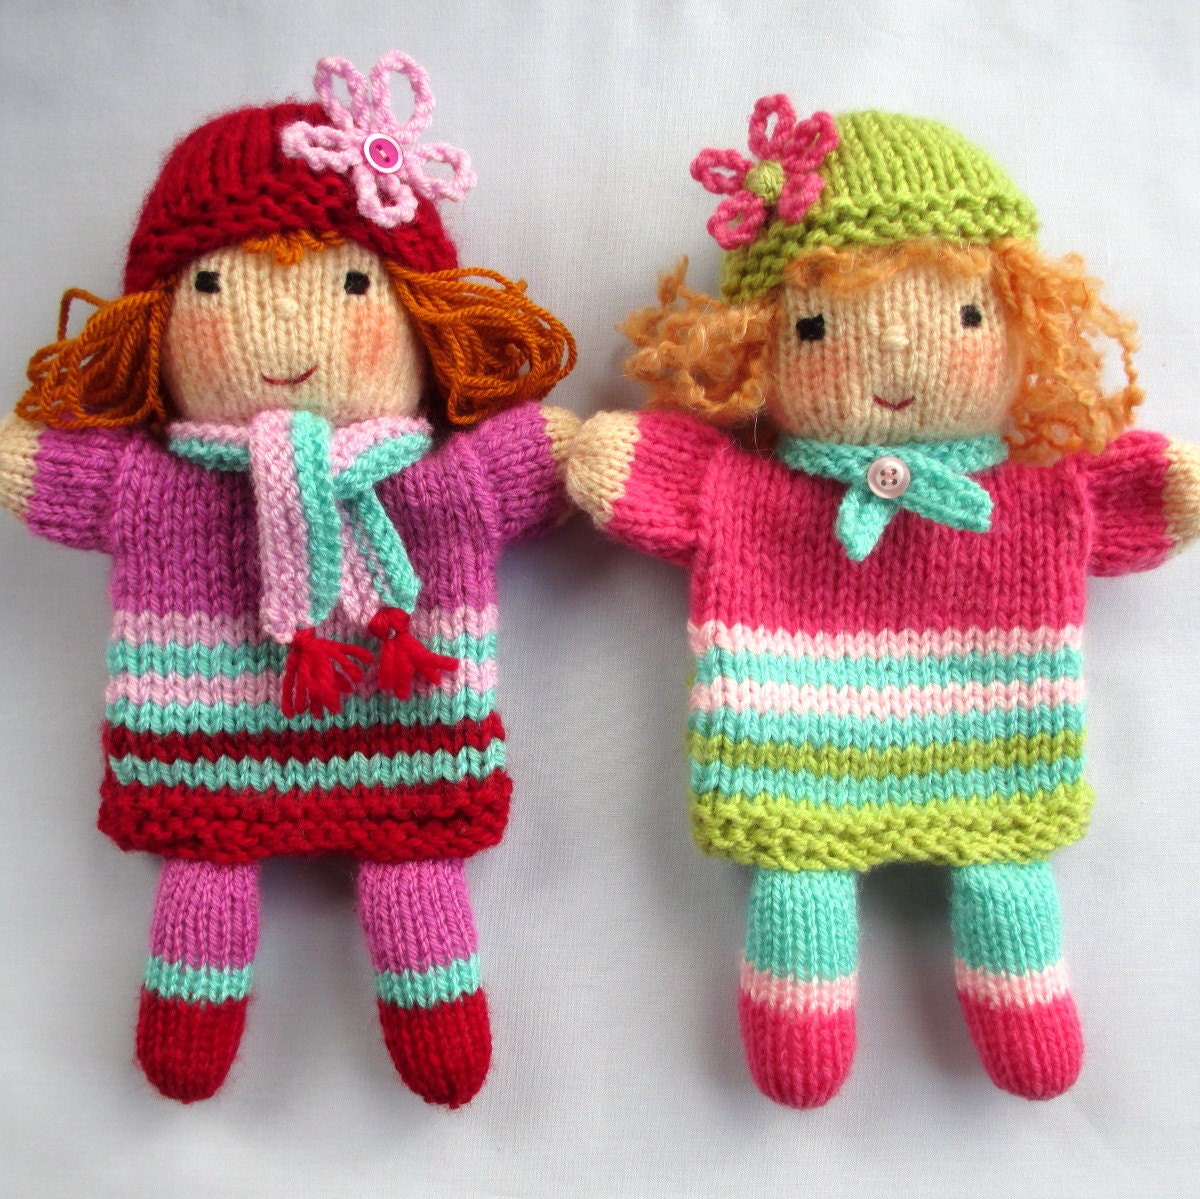 Ruby and Rose hand puppet doll knitting pattern by dollytime